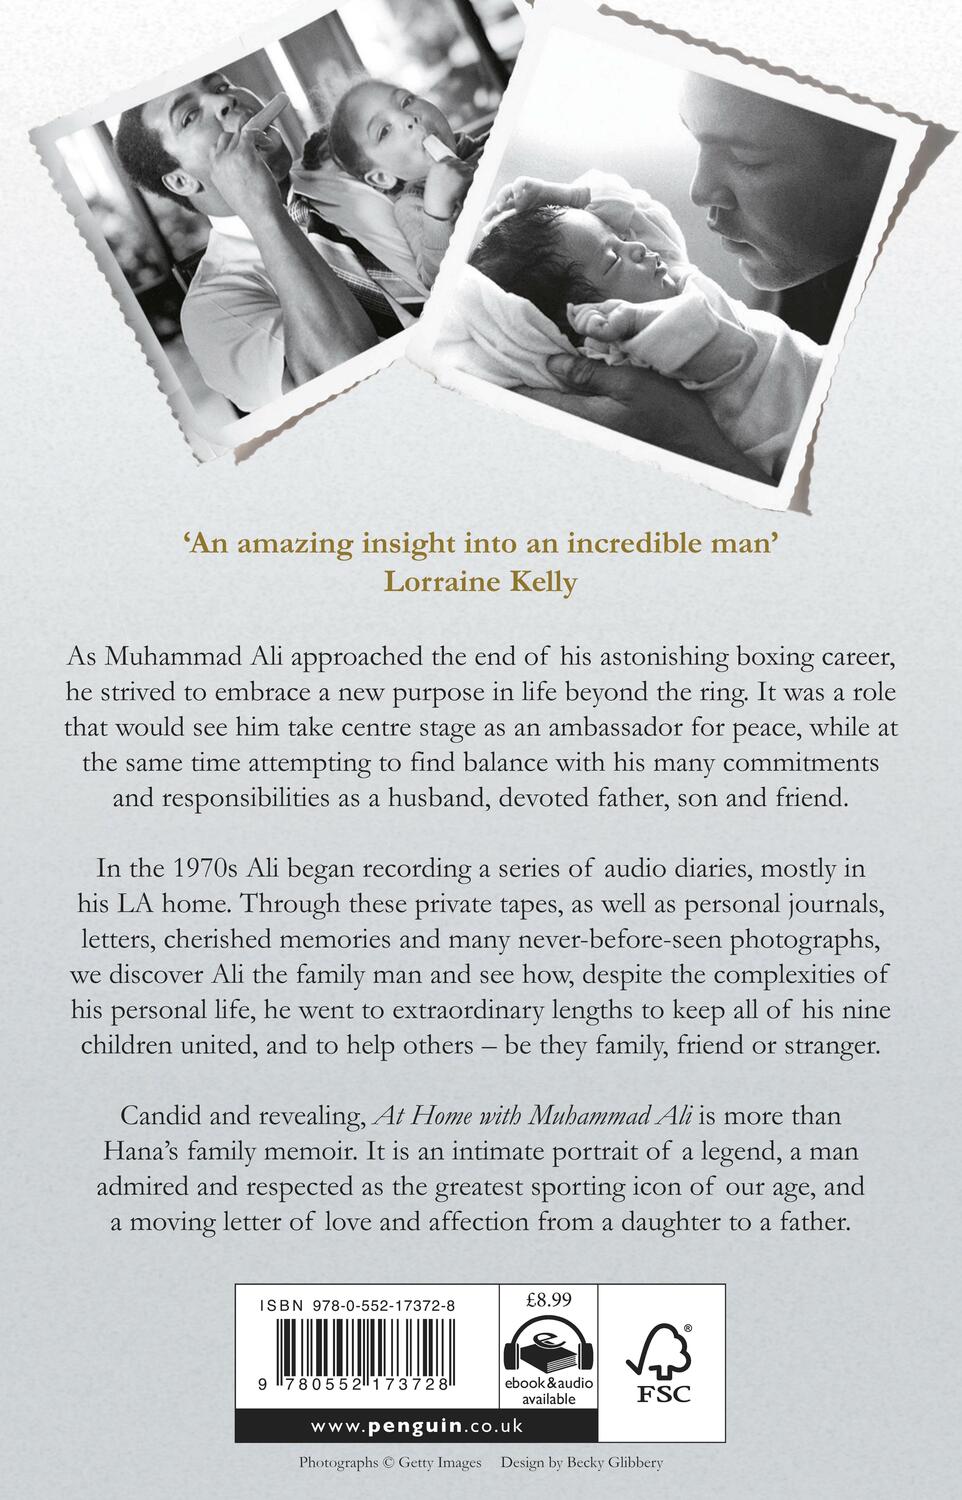 Rückseite: 9780552173728 | At Home with Muhammad Ali | A Memoir of Love, Loss and Forgiveness